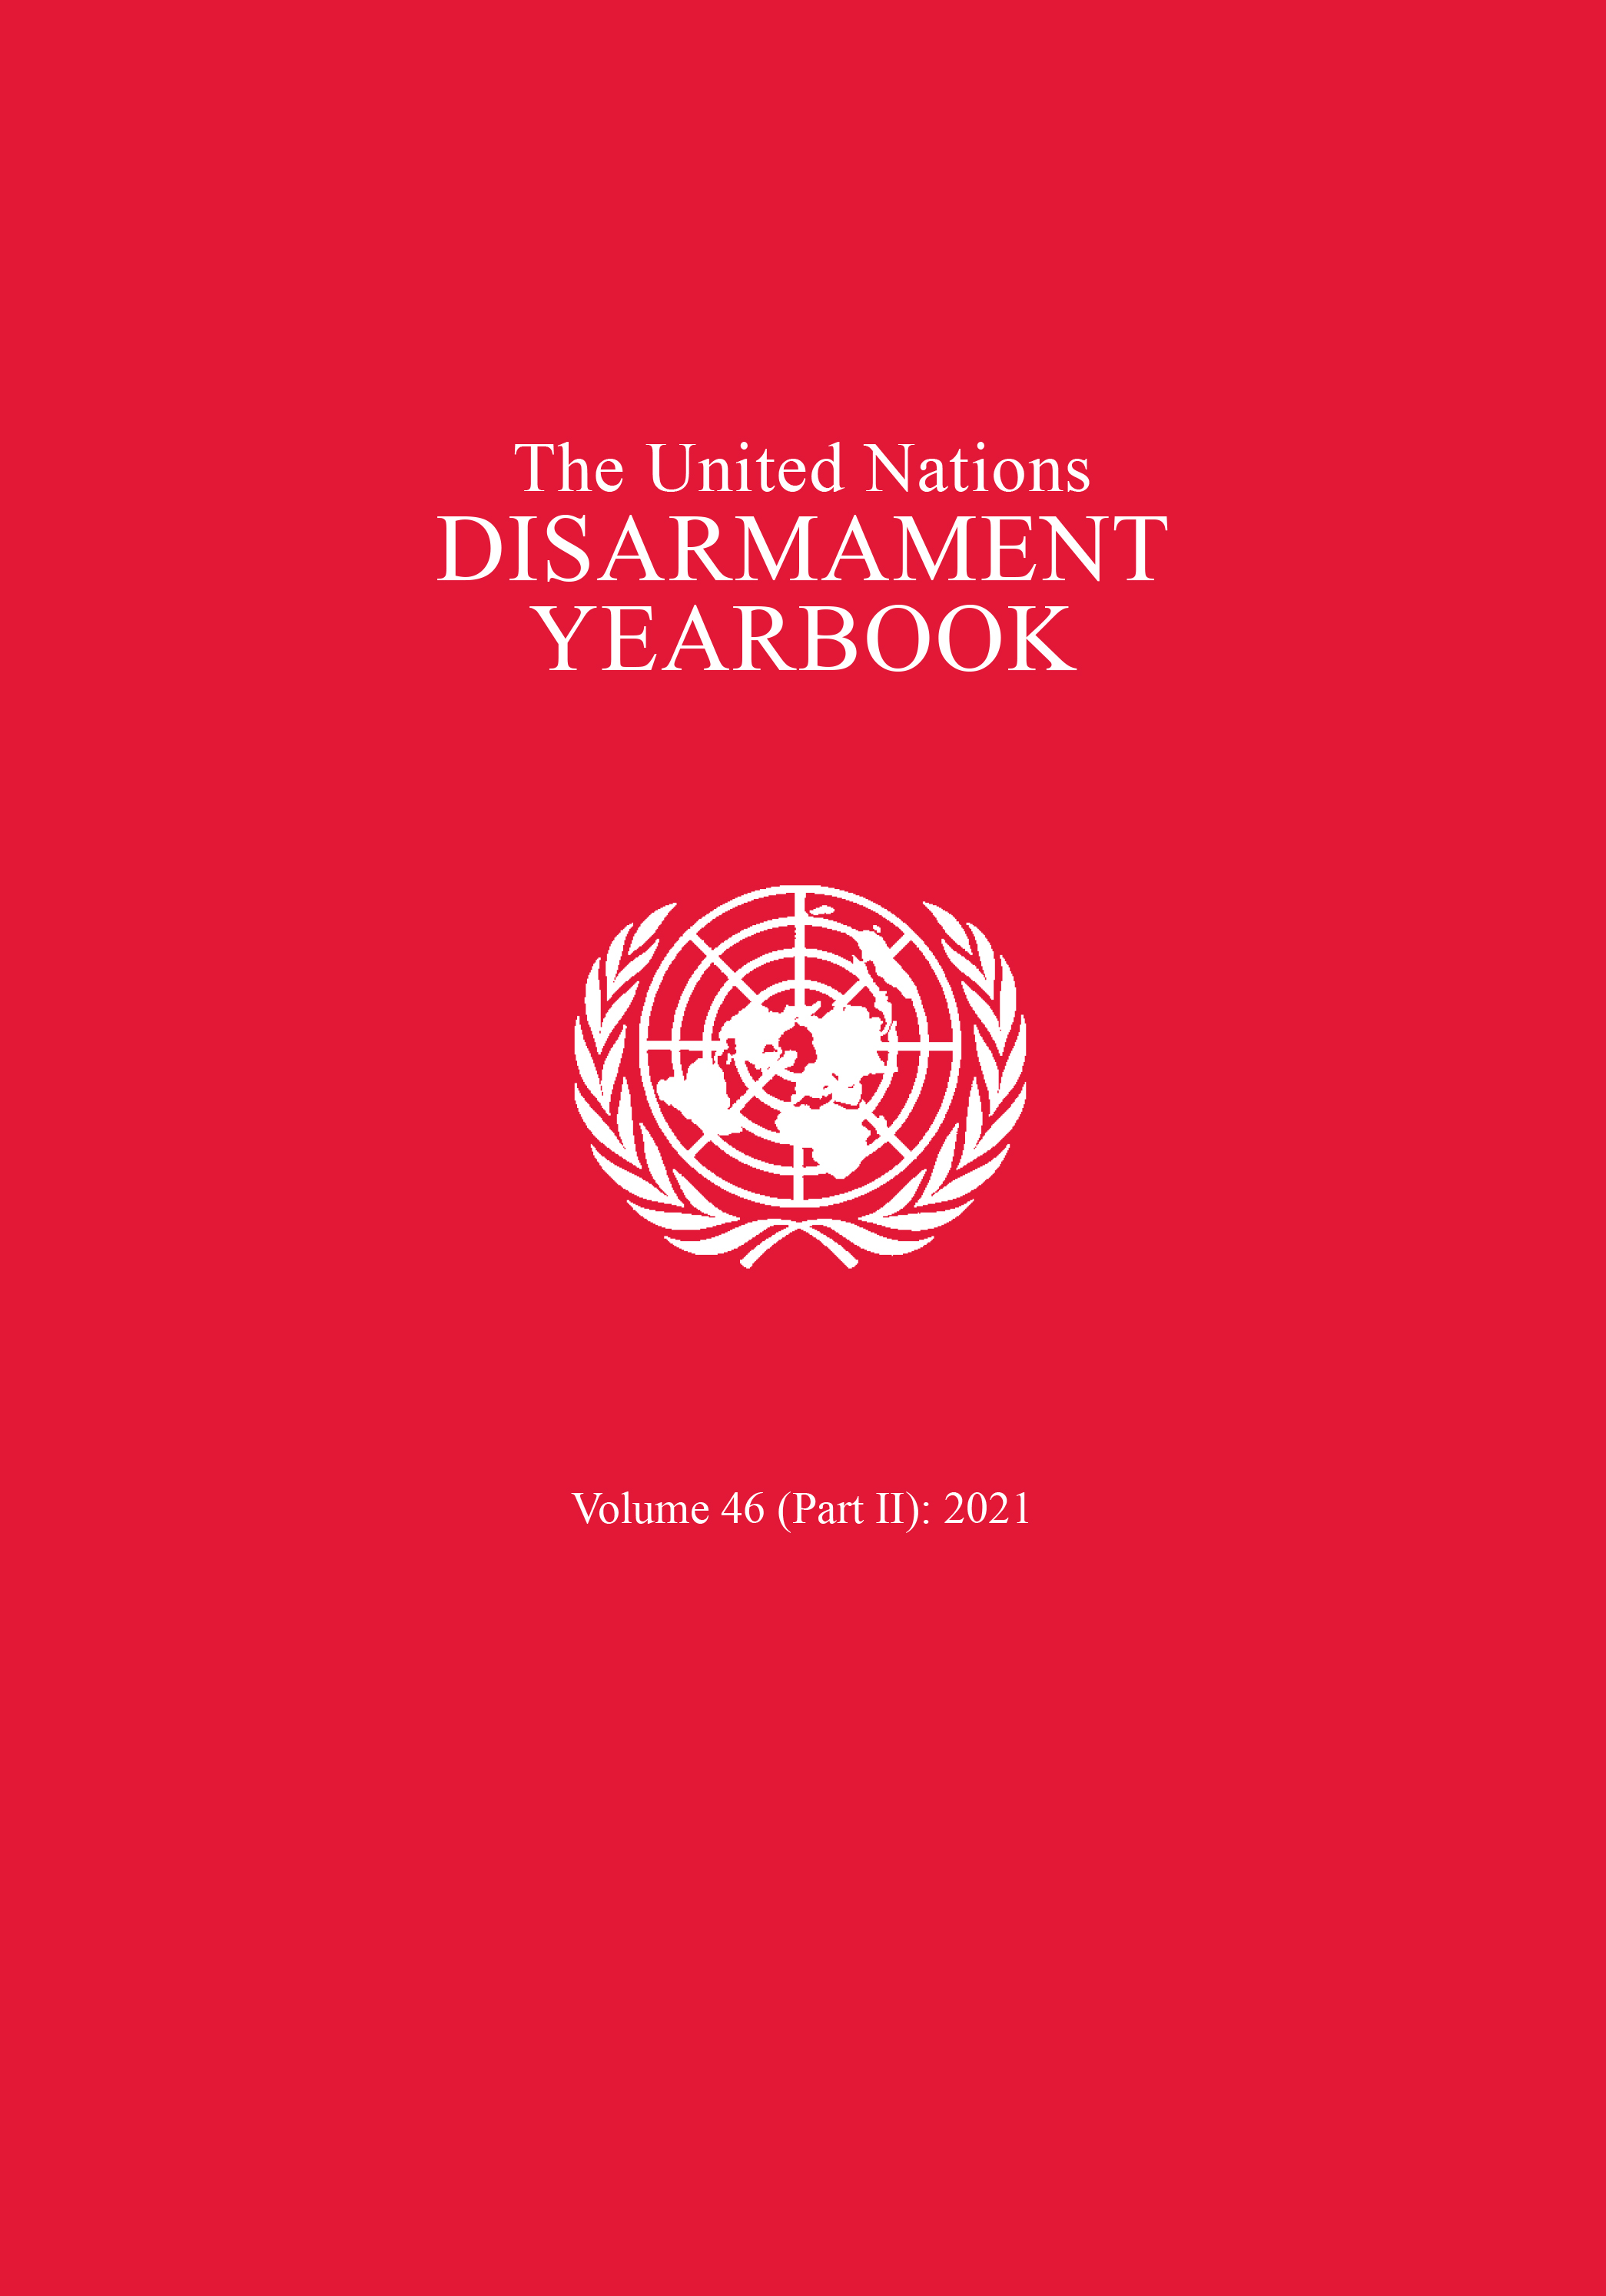 image of United Nations Disarmament Yearbook 2021: Part II